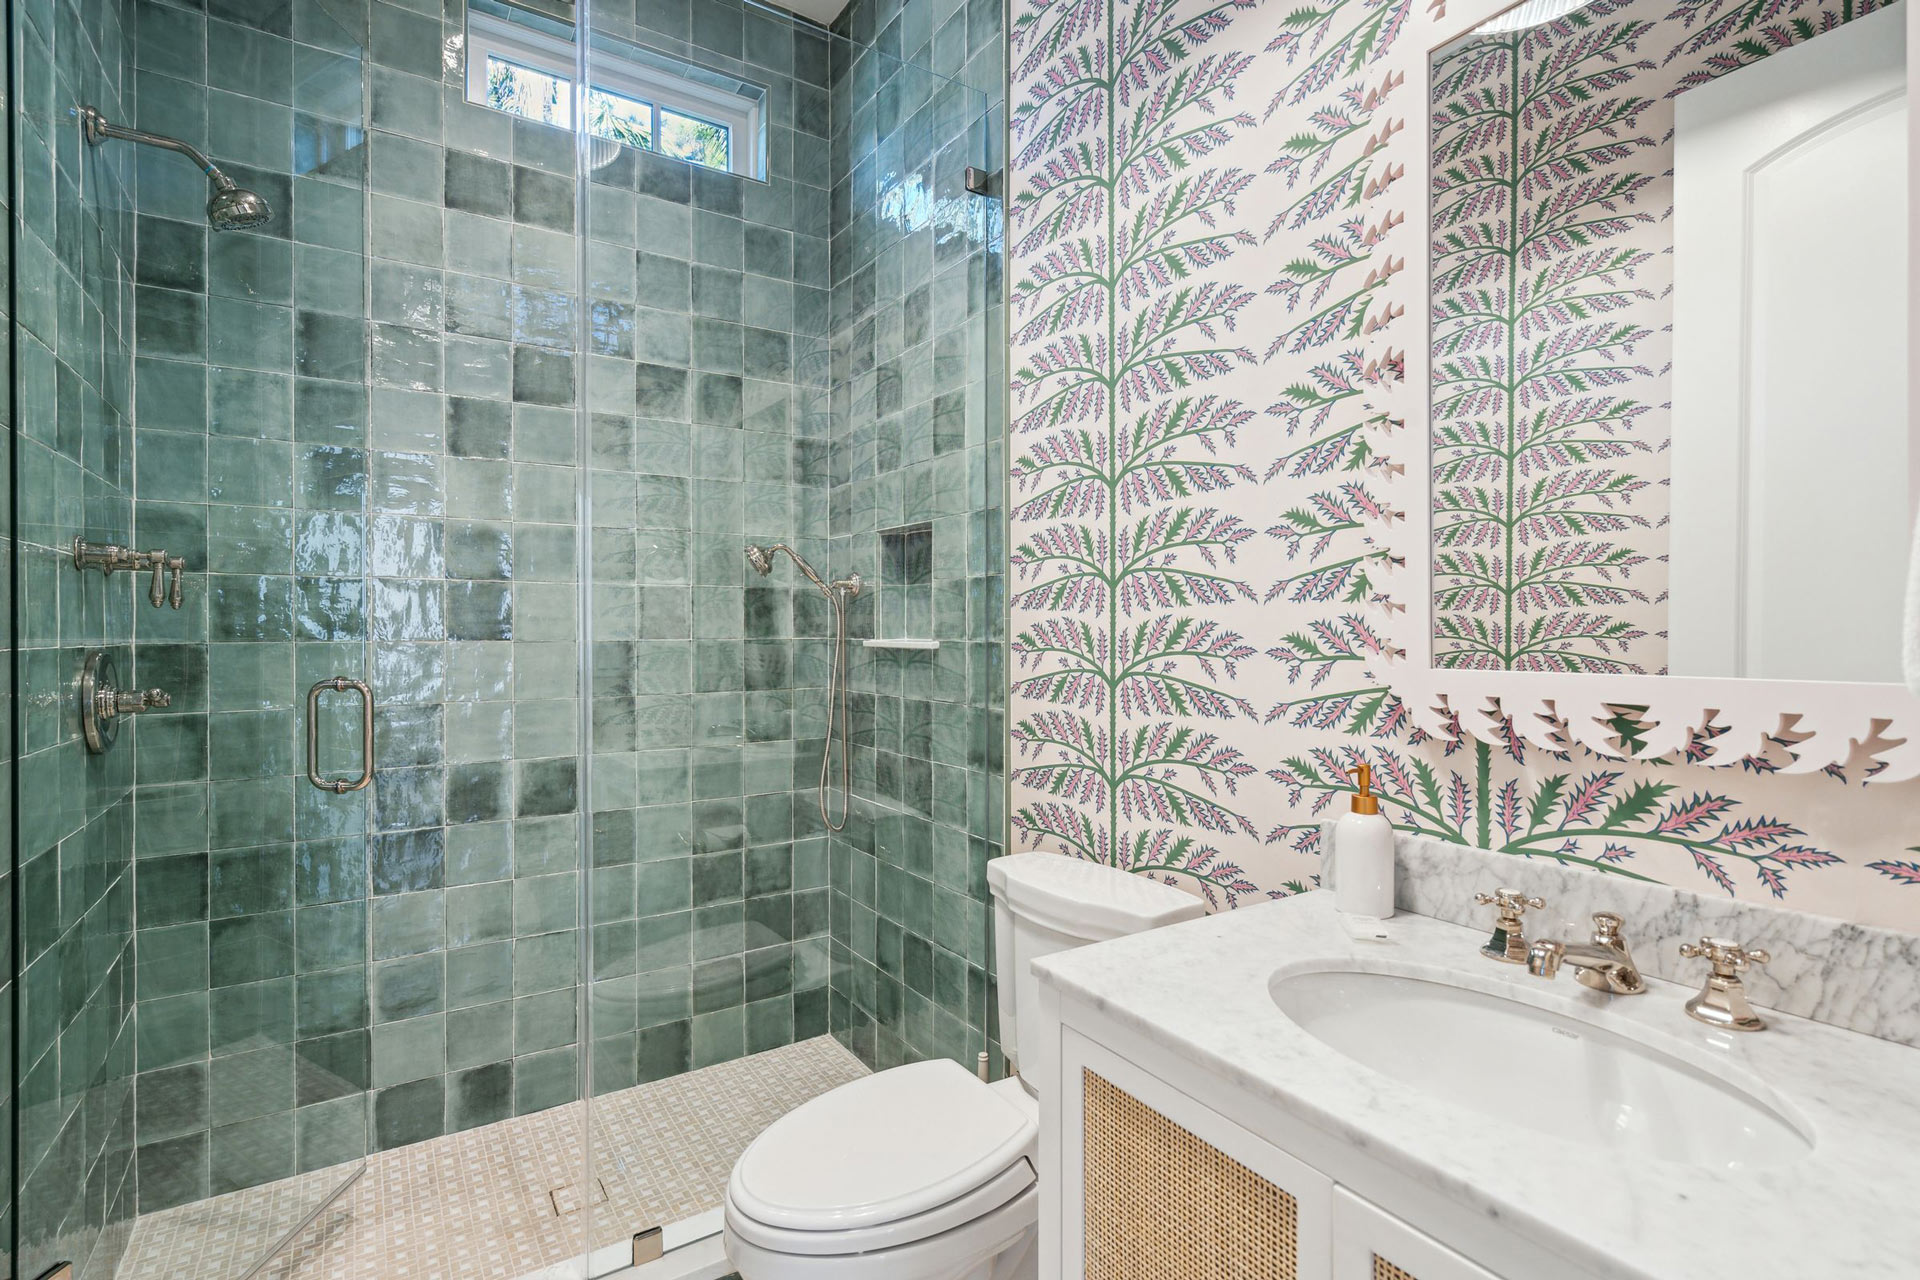 Fun, vibrant guest bath with emerald green tiles and botanical wallpaper